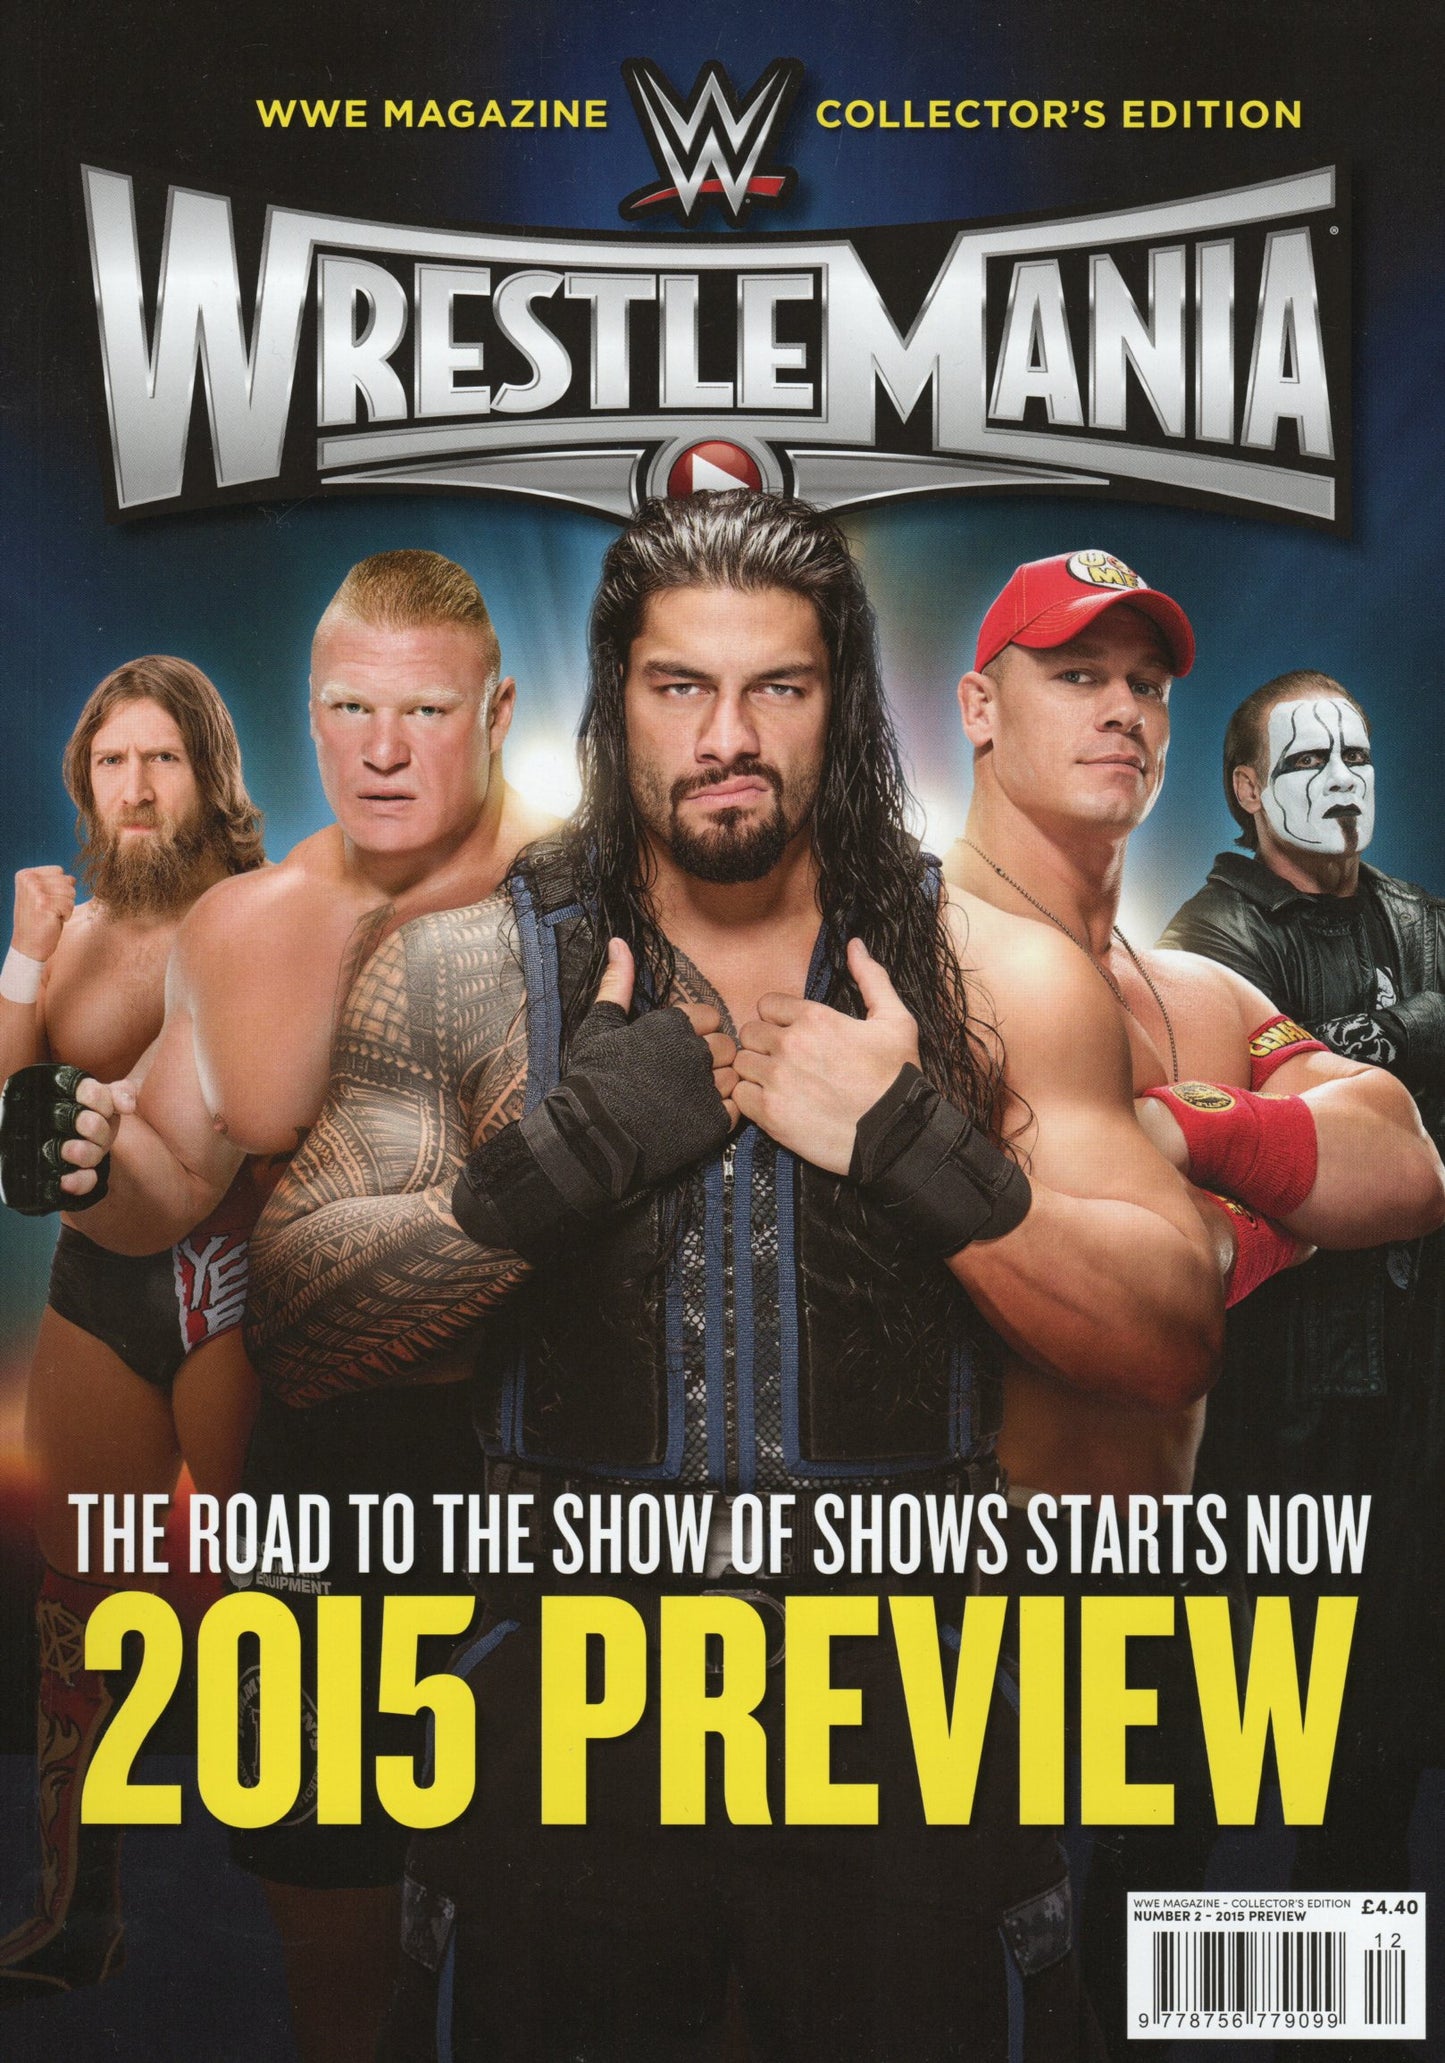 WWE Magazine Wrestlemania 2015 Preview Collector's Edition